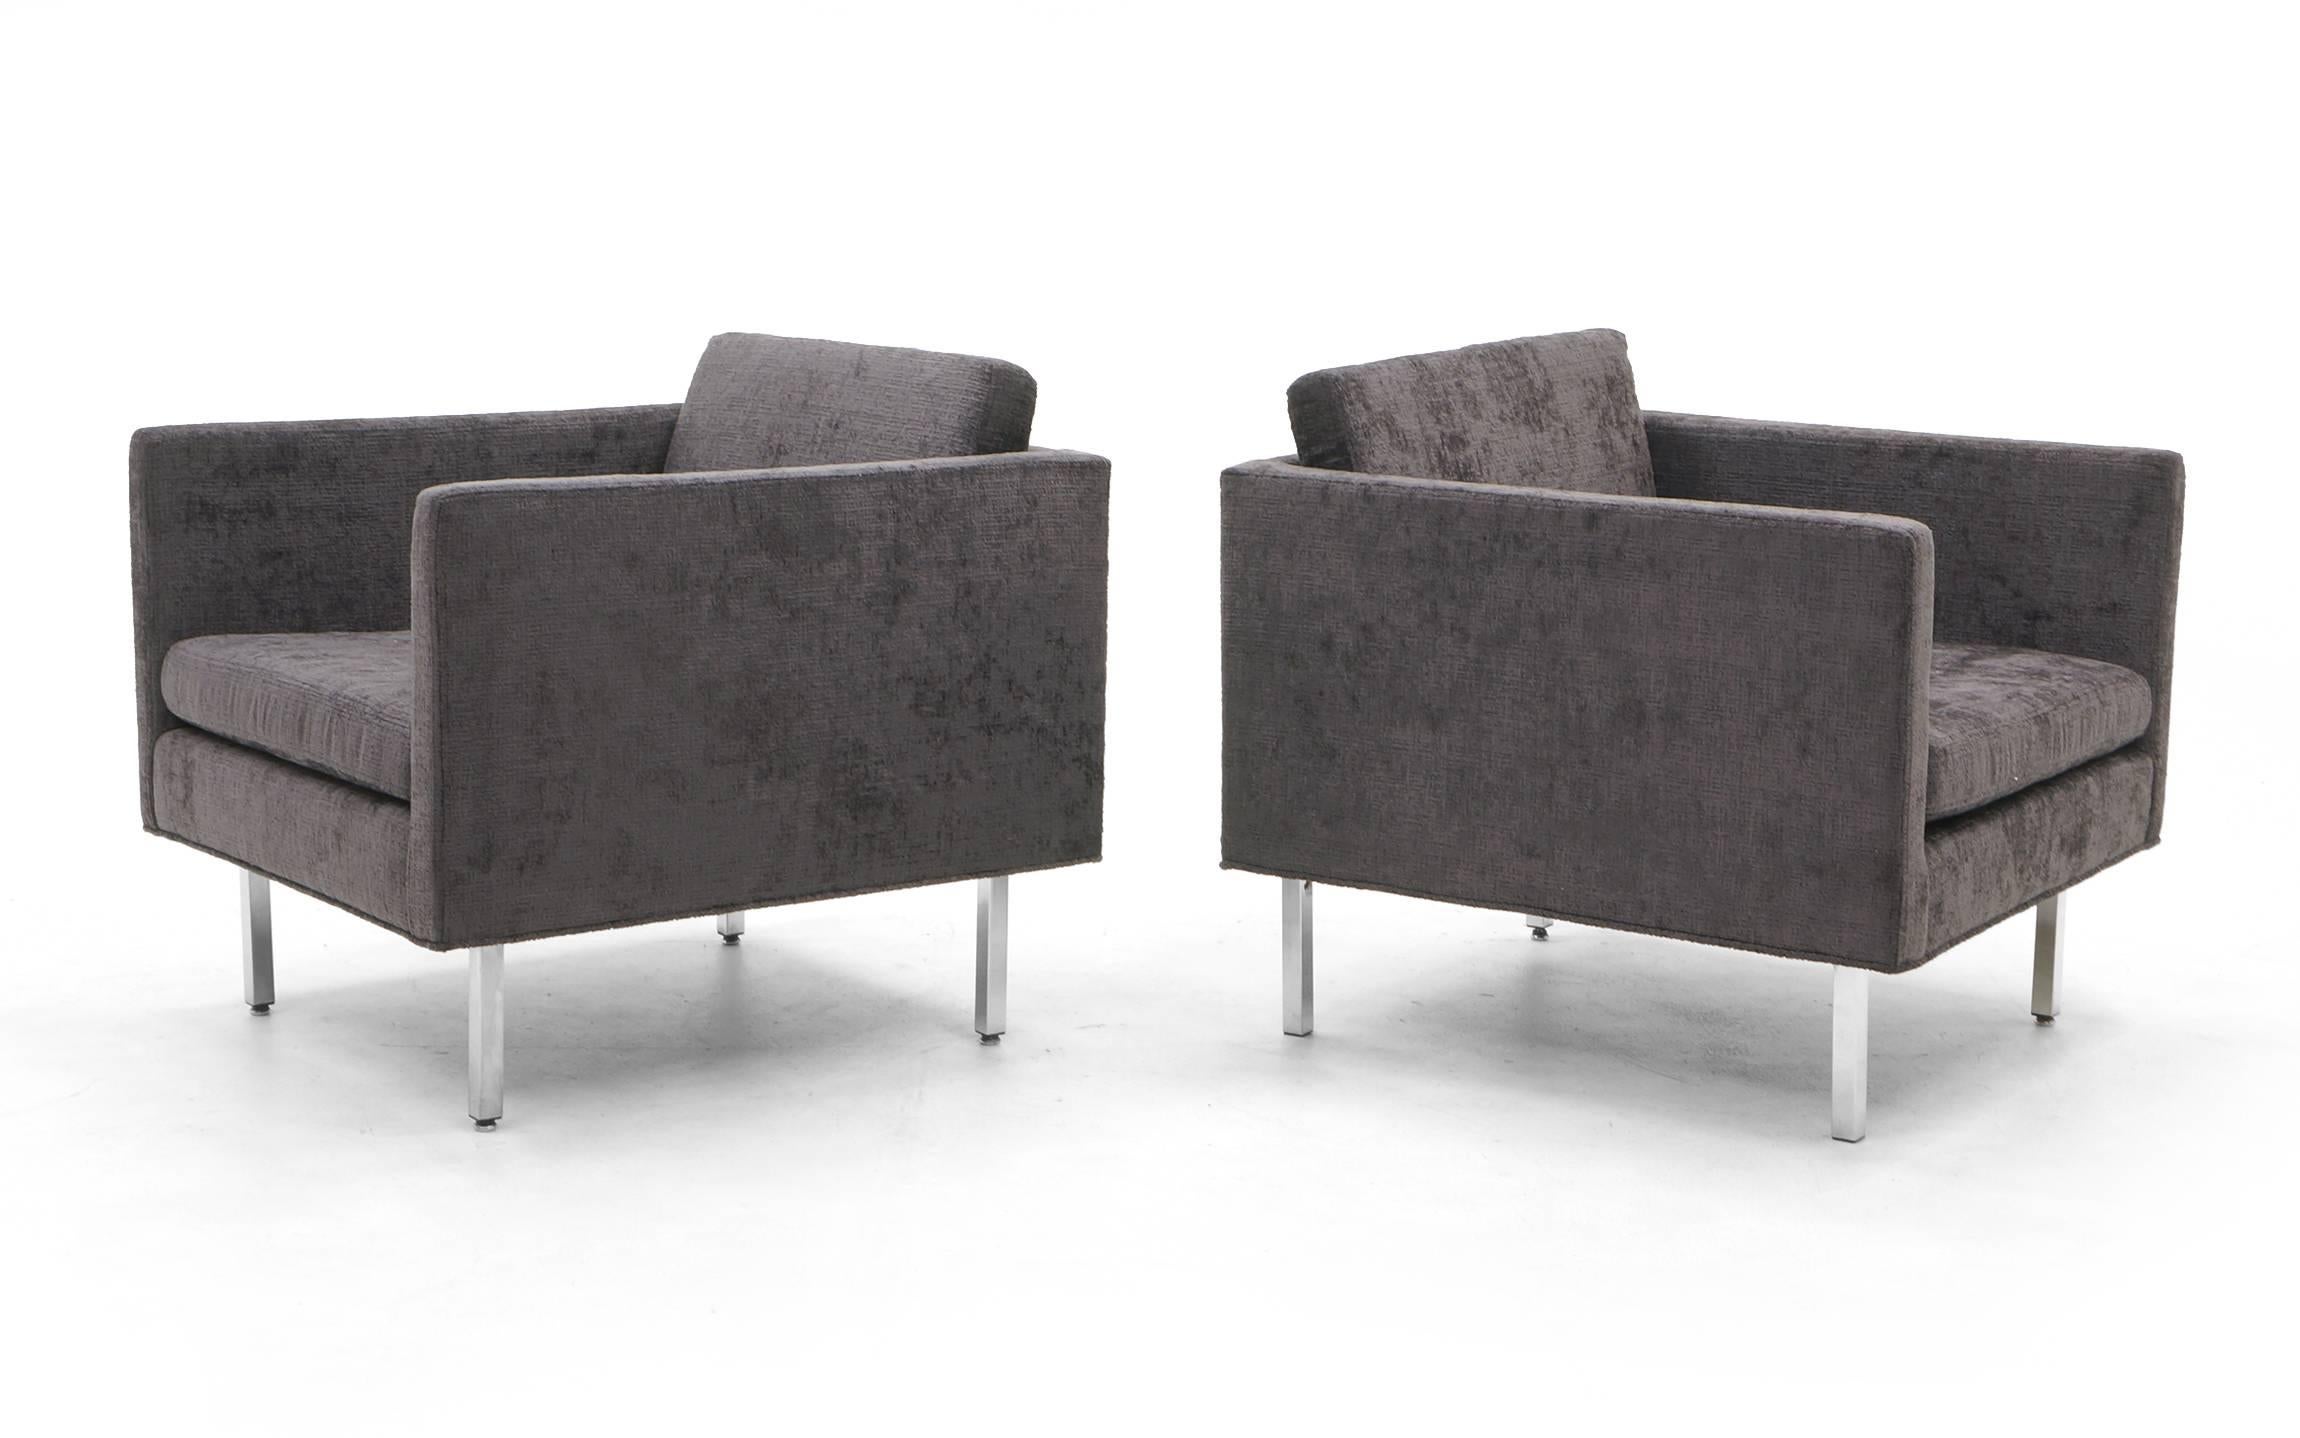 Pair of Milo Baughman cube / square lounge chairs expertly restored and reupholstered in a stunning Robert Allen Chenille, charcoal grey. Beautiful scale with the slightly taller chrome legs.